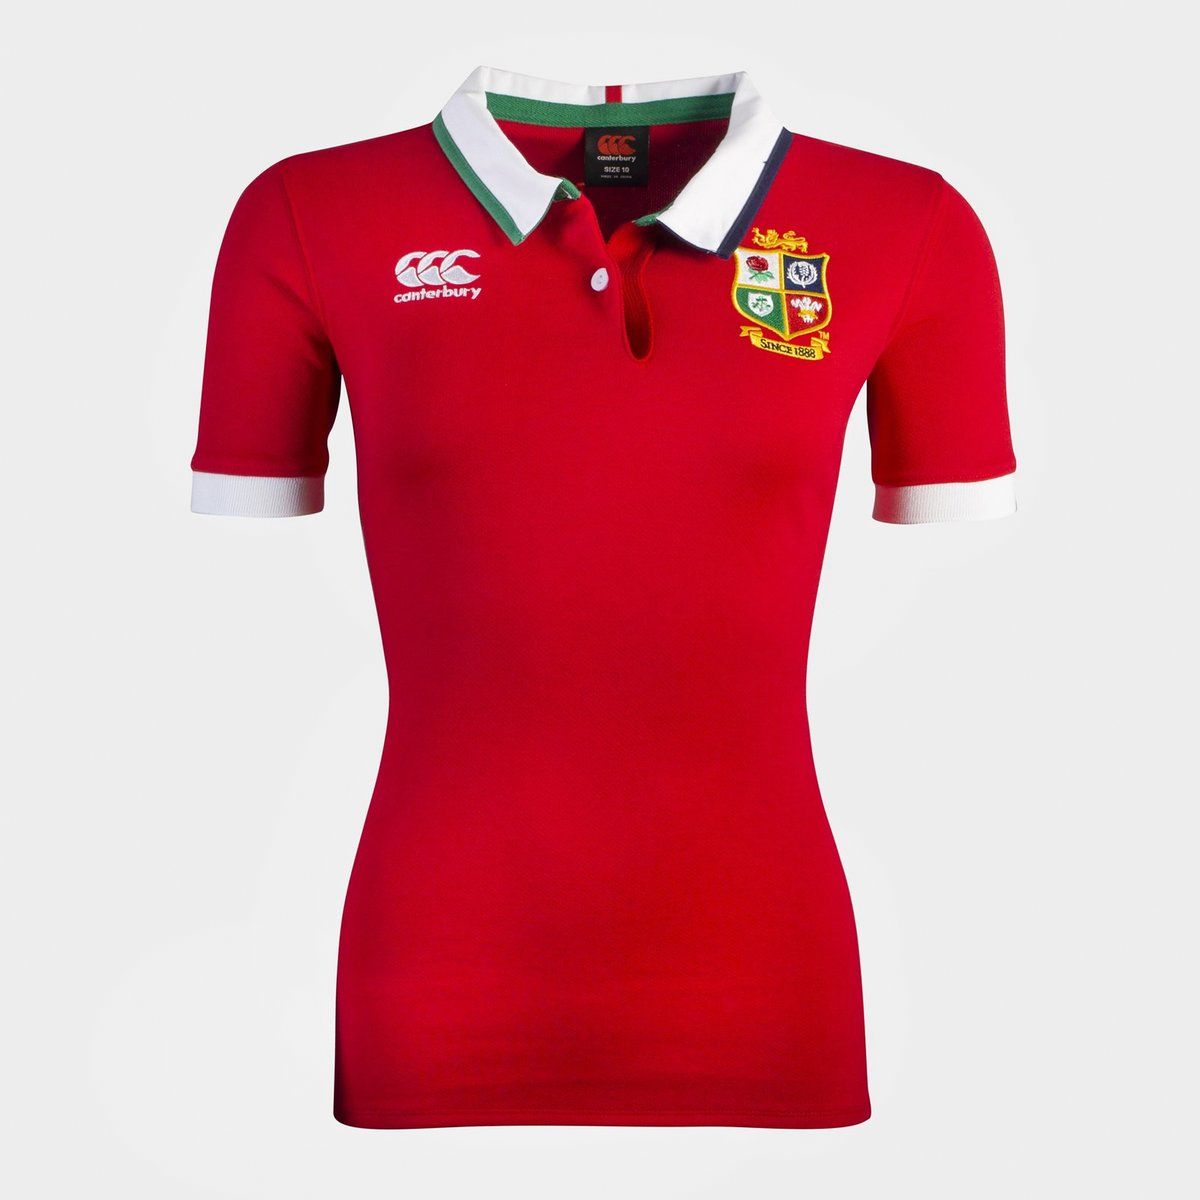 Official British & Irish Lions Rugby Shirt, Kit & Clothing 2021